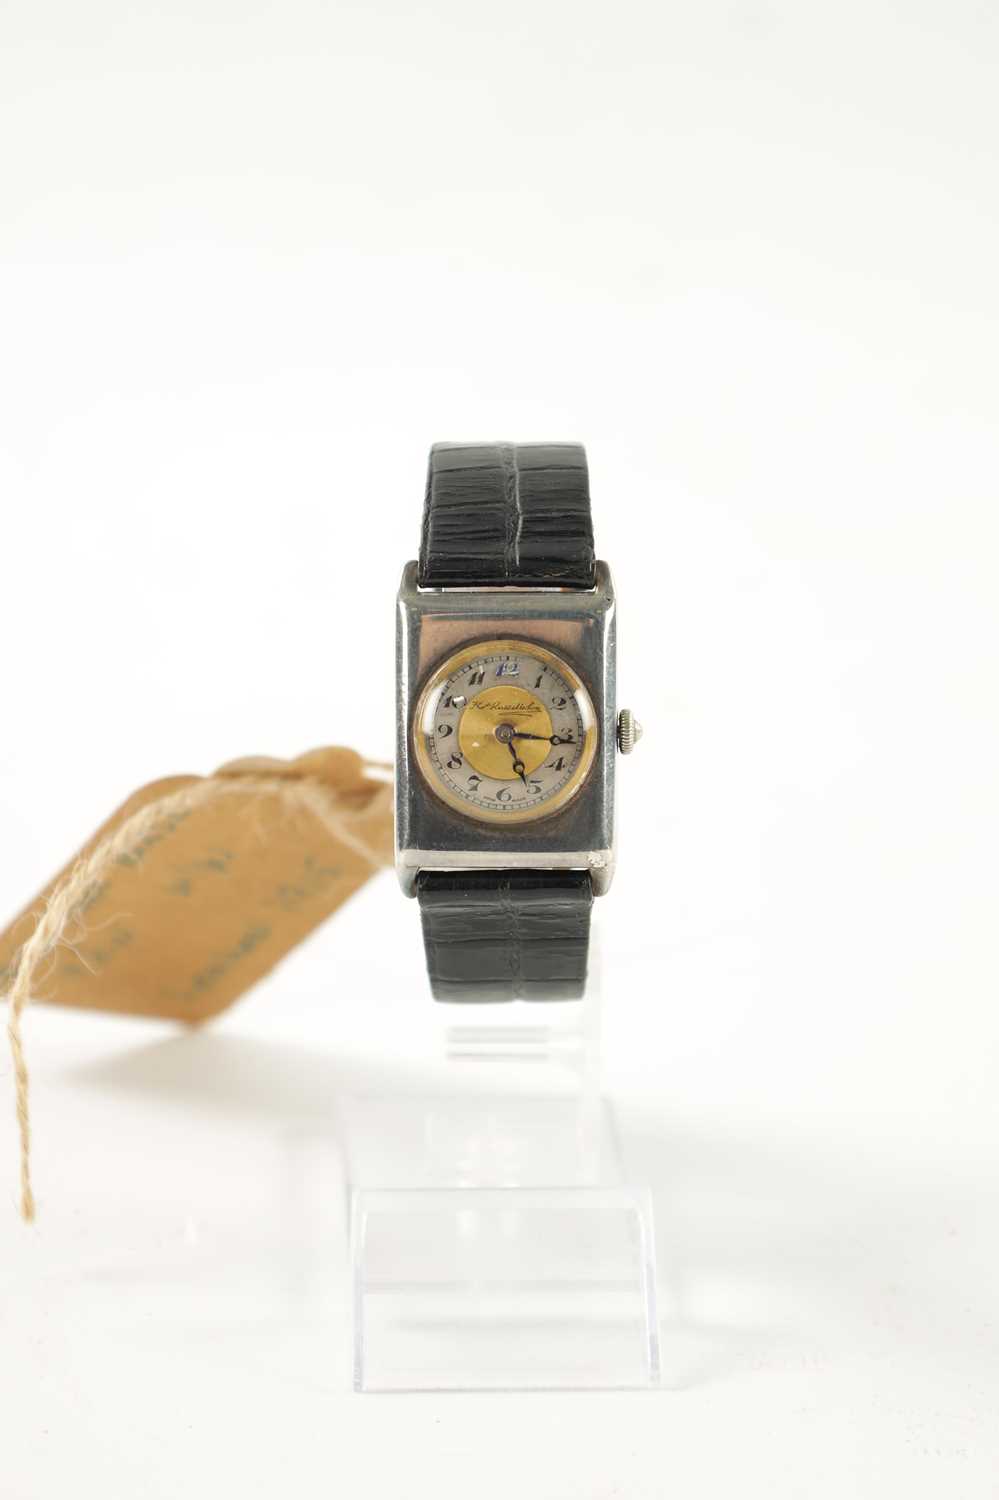 AN EARLY 20TH CENTURY SILVER THOMAS RUSSELL TANK-SHAPED WRISTWATCH - Image 2 of 5